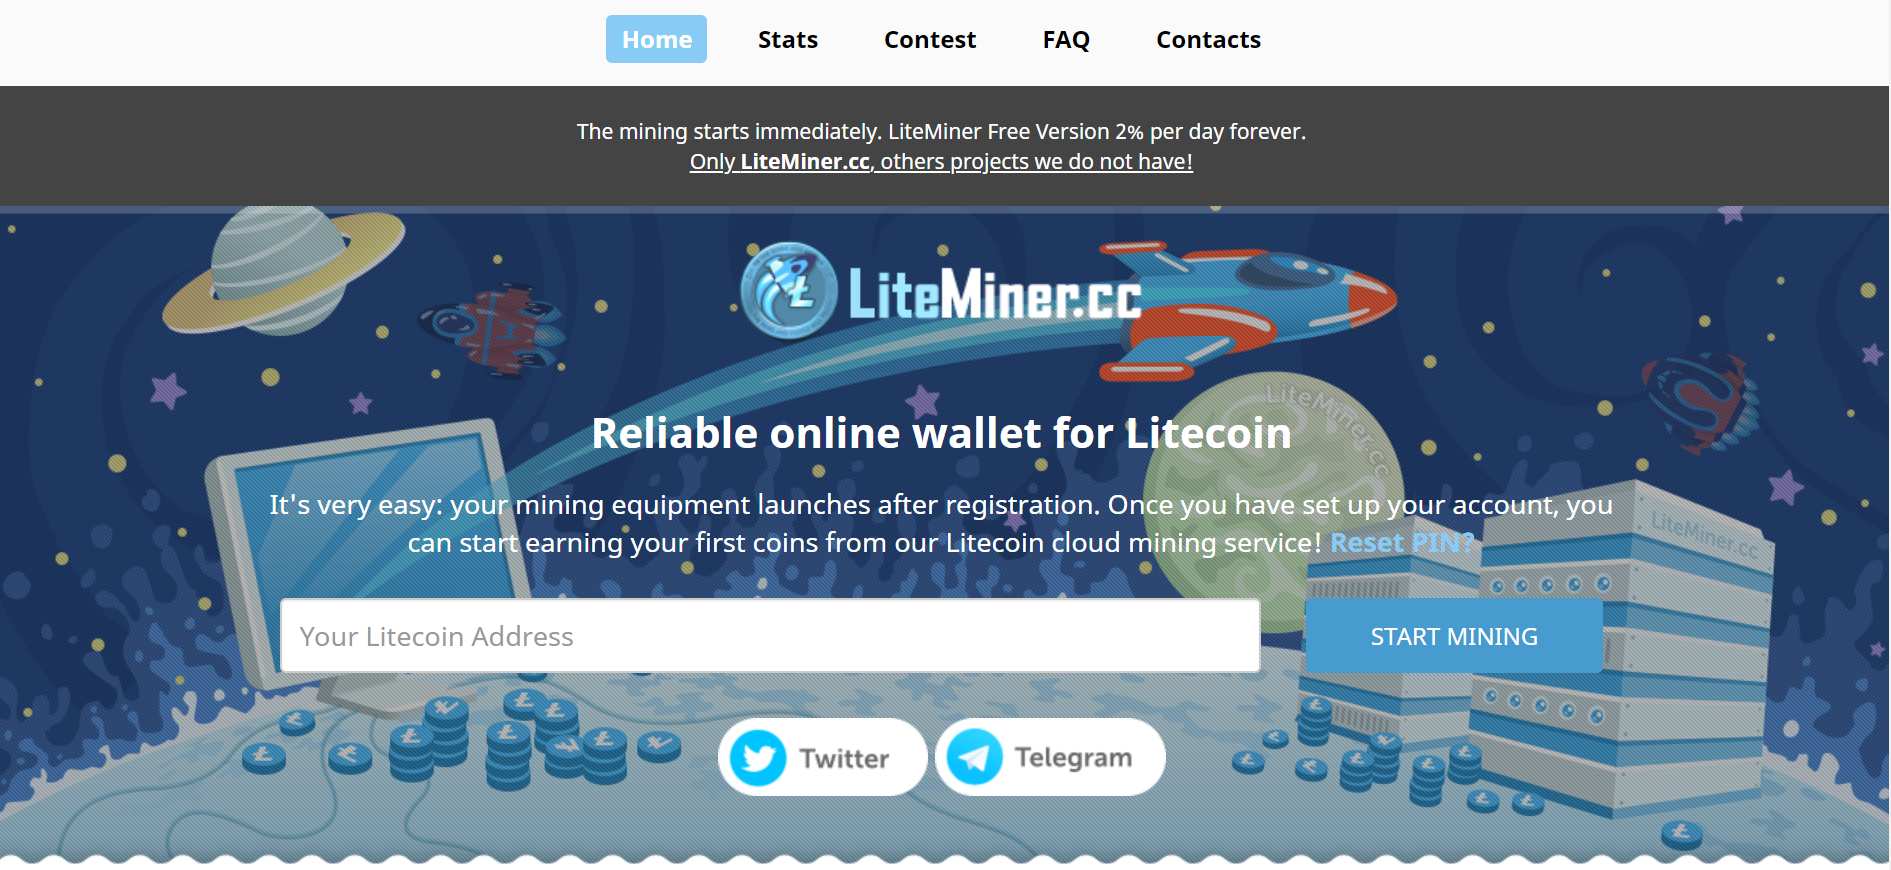 How to make money online e how to get free referrals with Liteminer